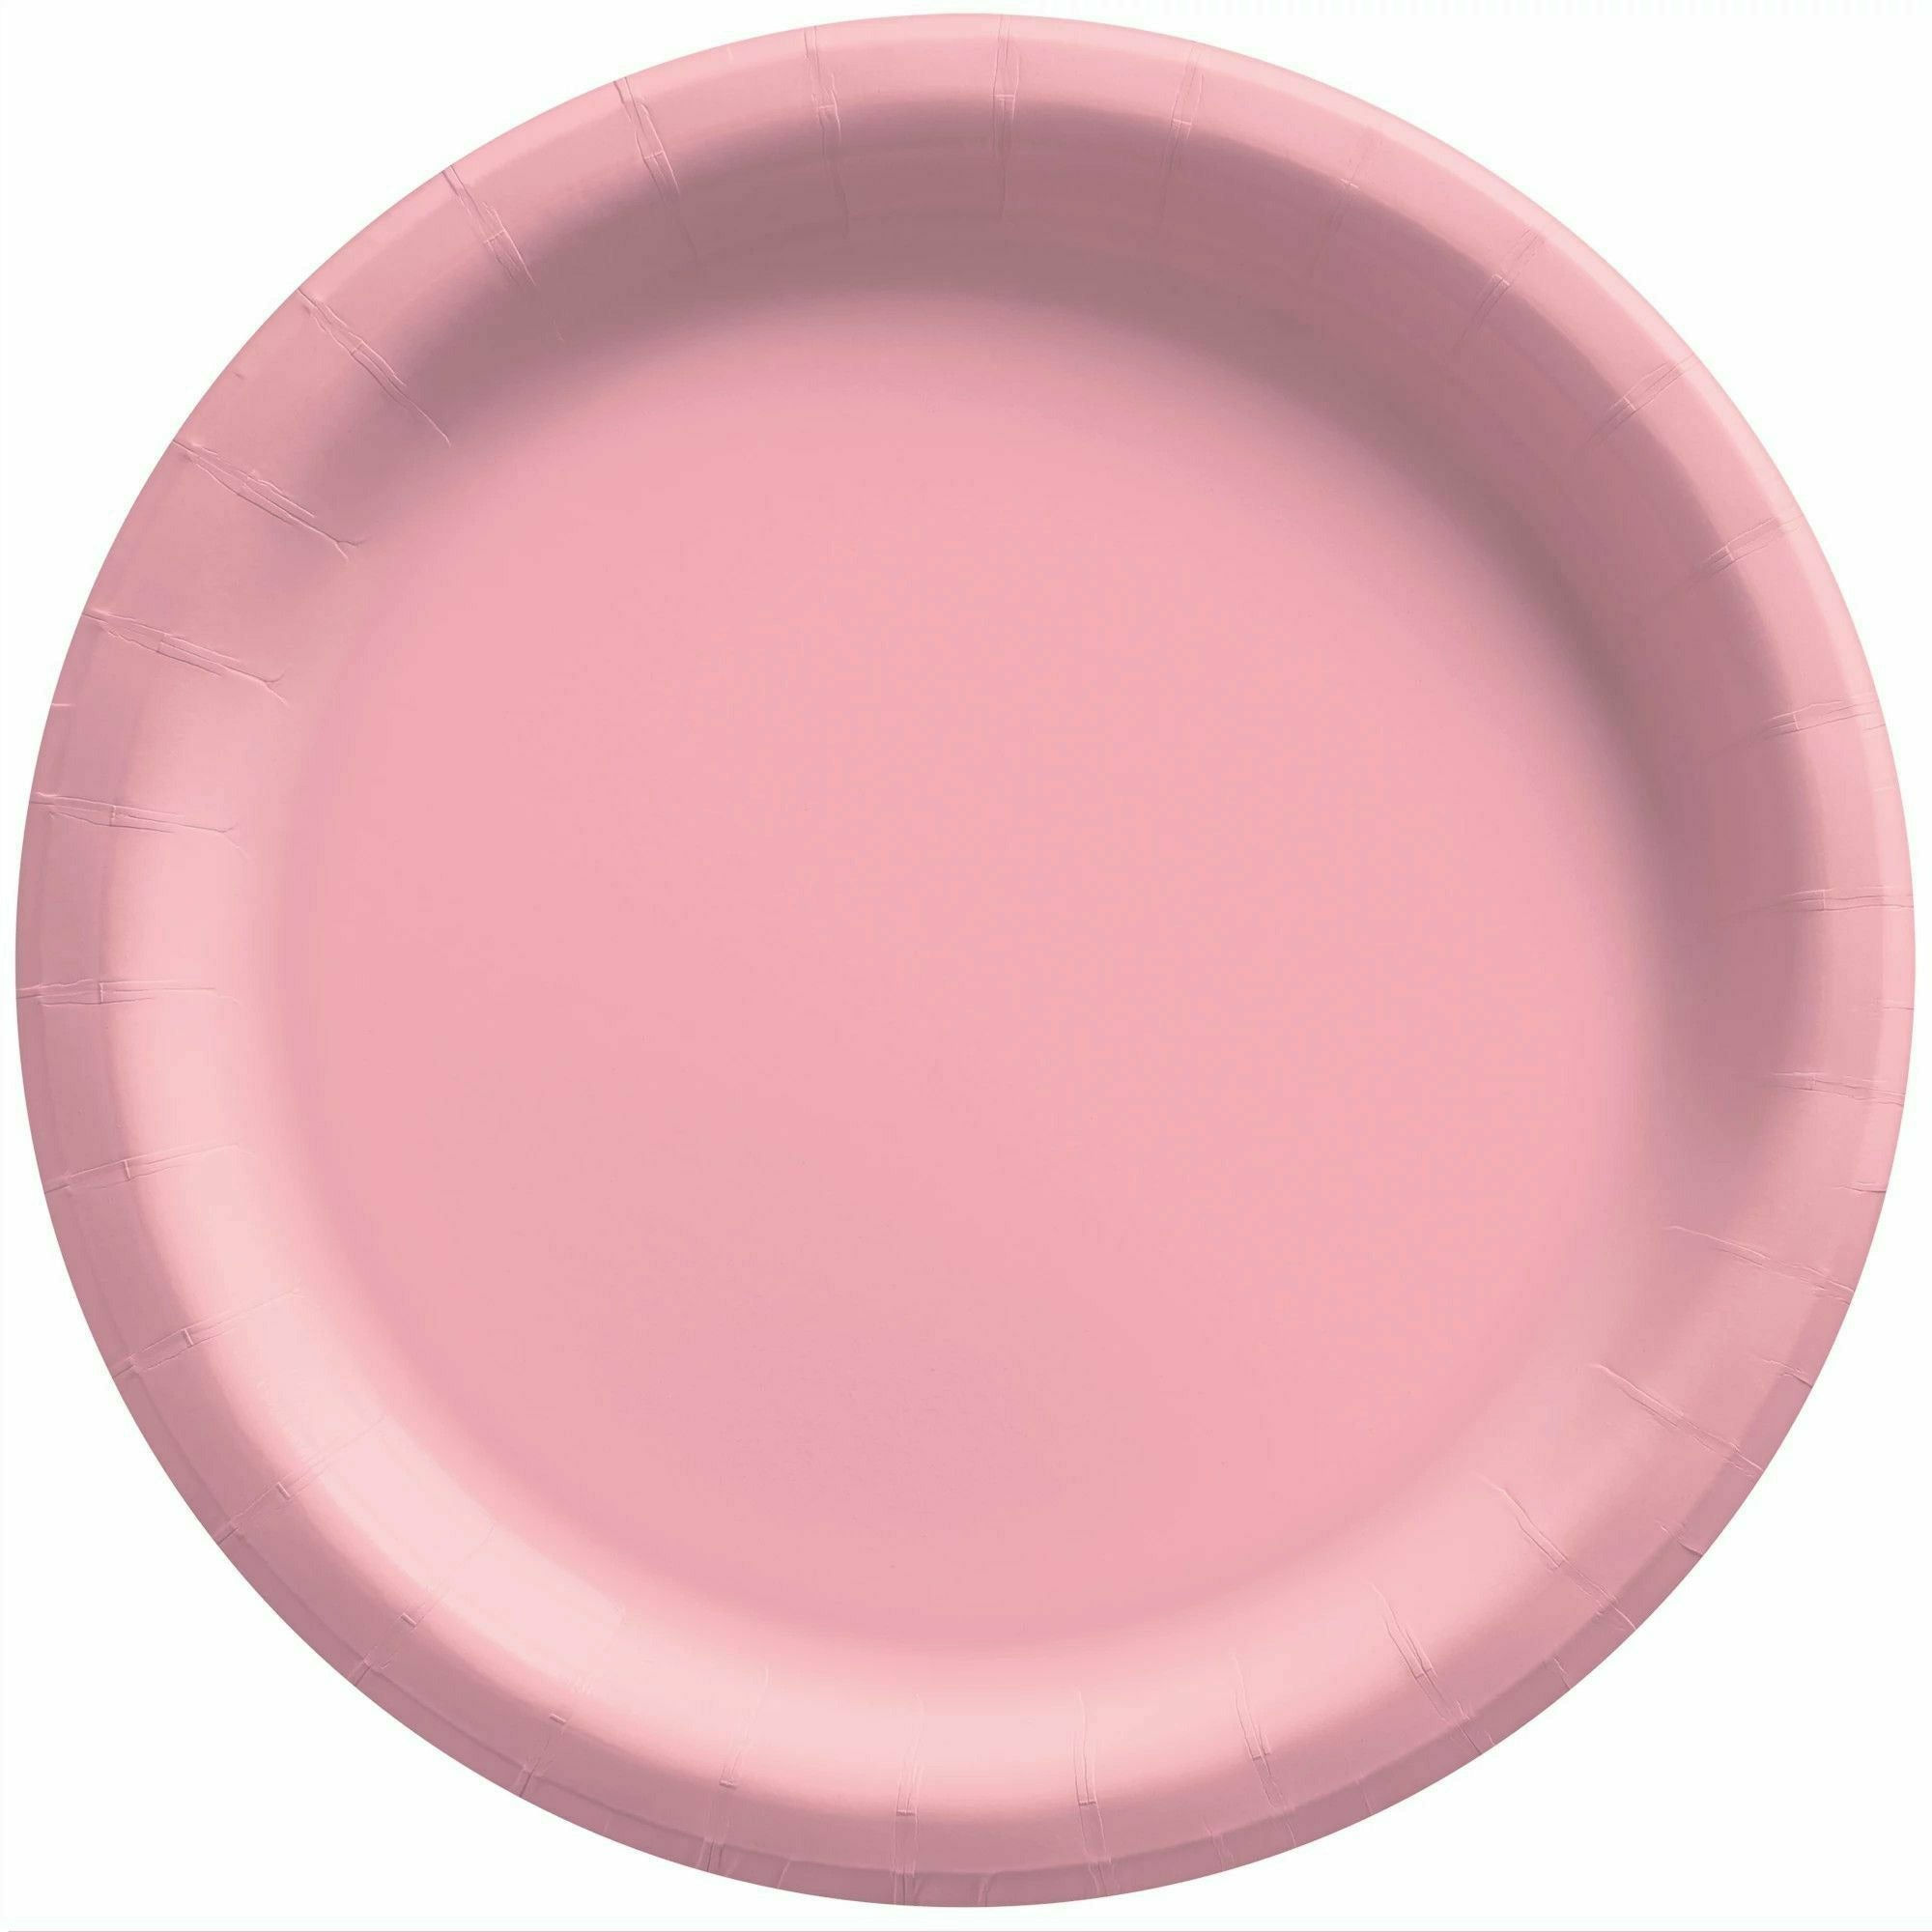 Amscan BASIC New Pink - 6 3/4" Round Paper Plates, 50 Ct.